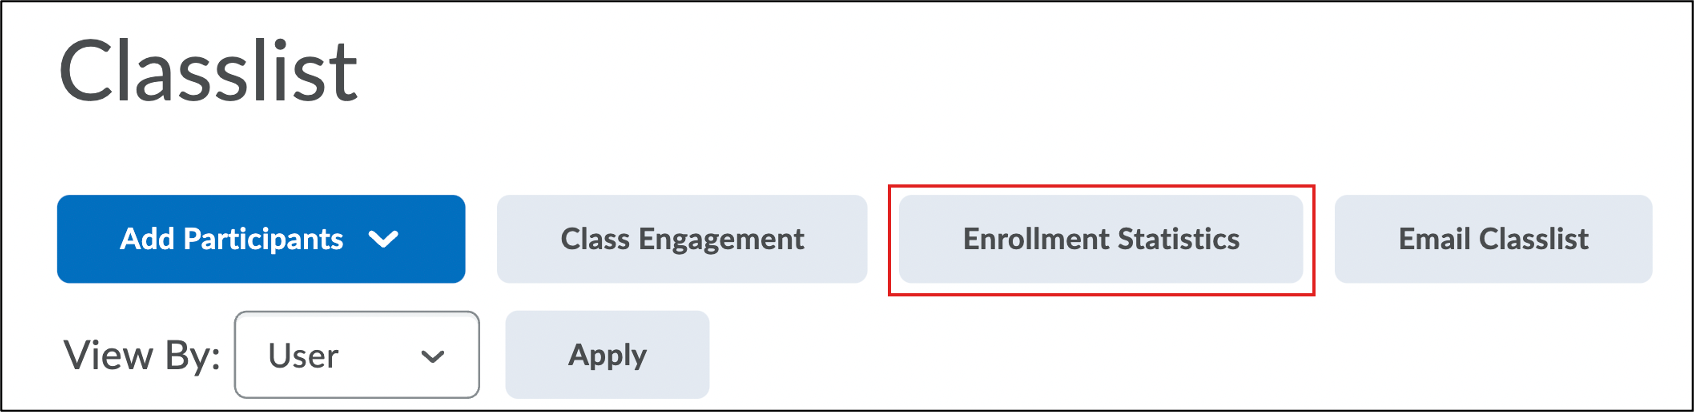 Screenshot of Classlist page with red callout around the Enrollment Statistics button.